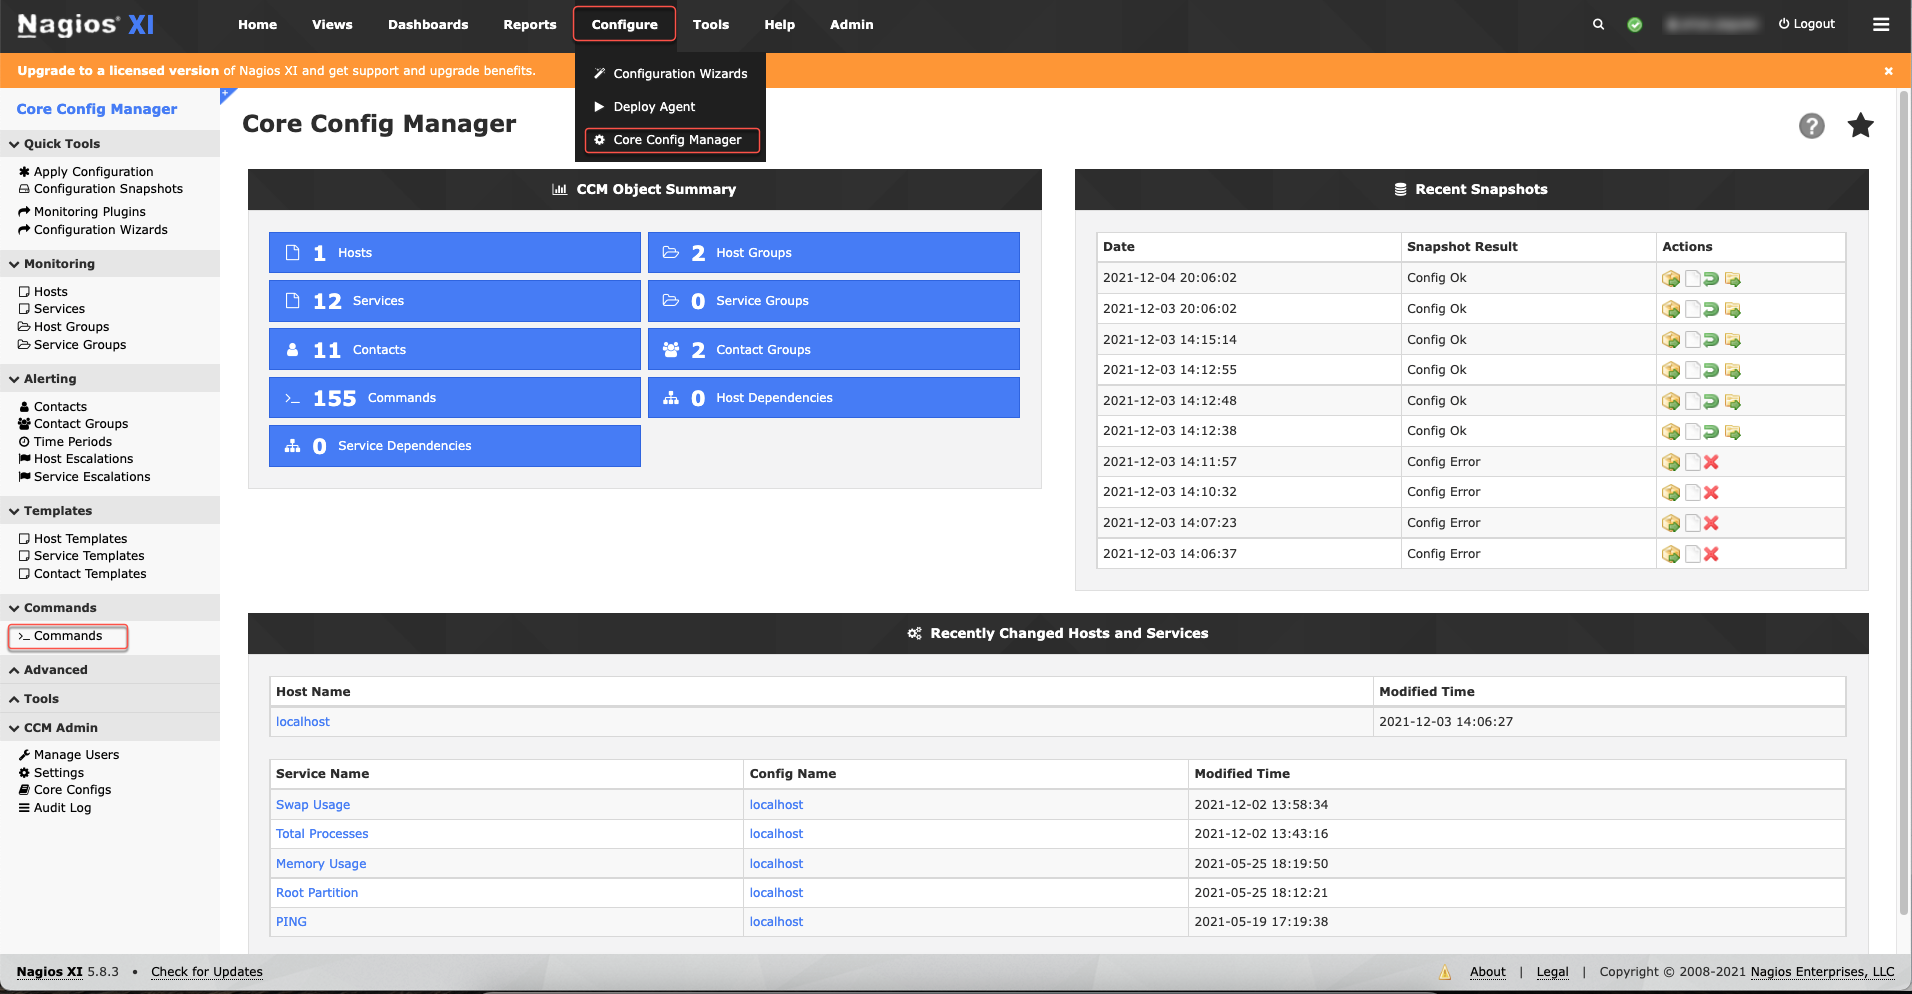 Core Config Manager page.